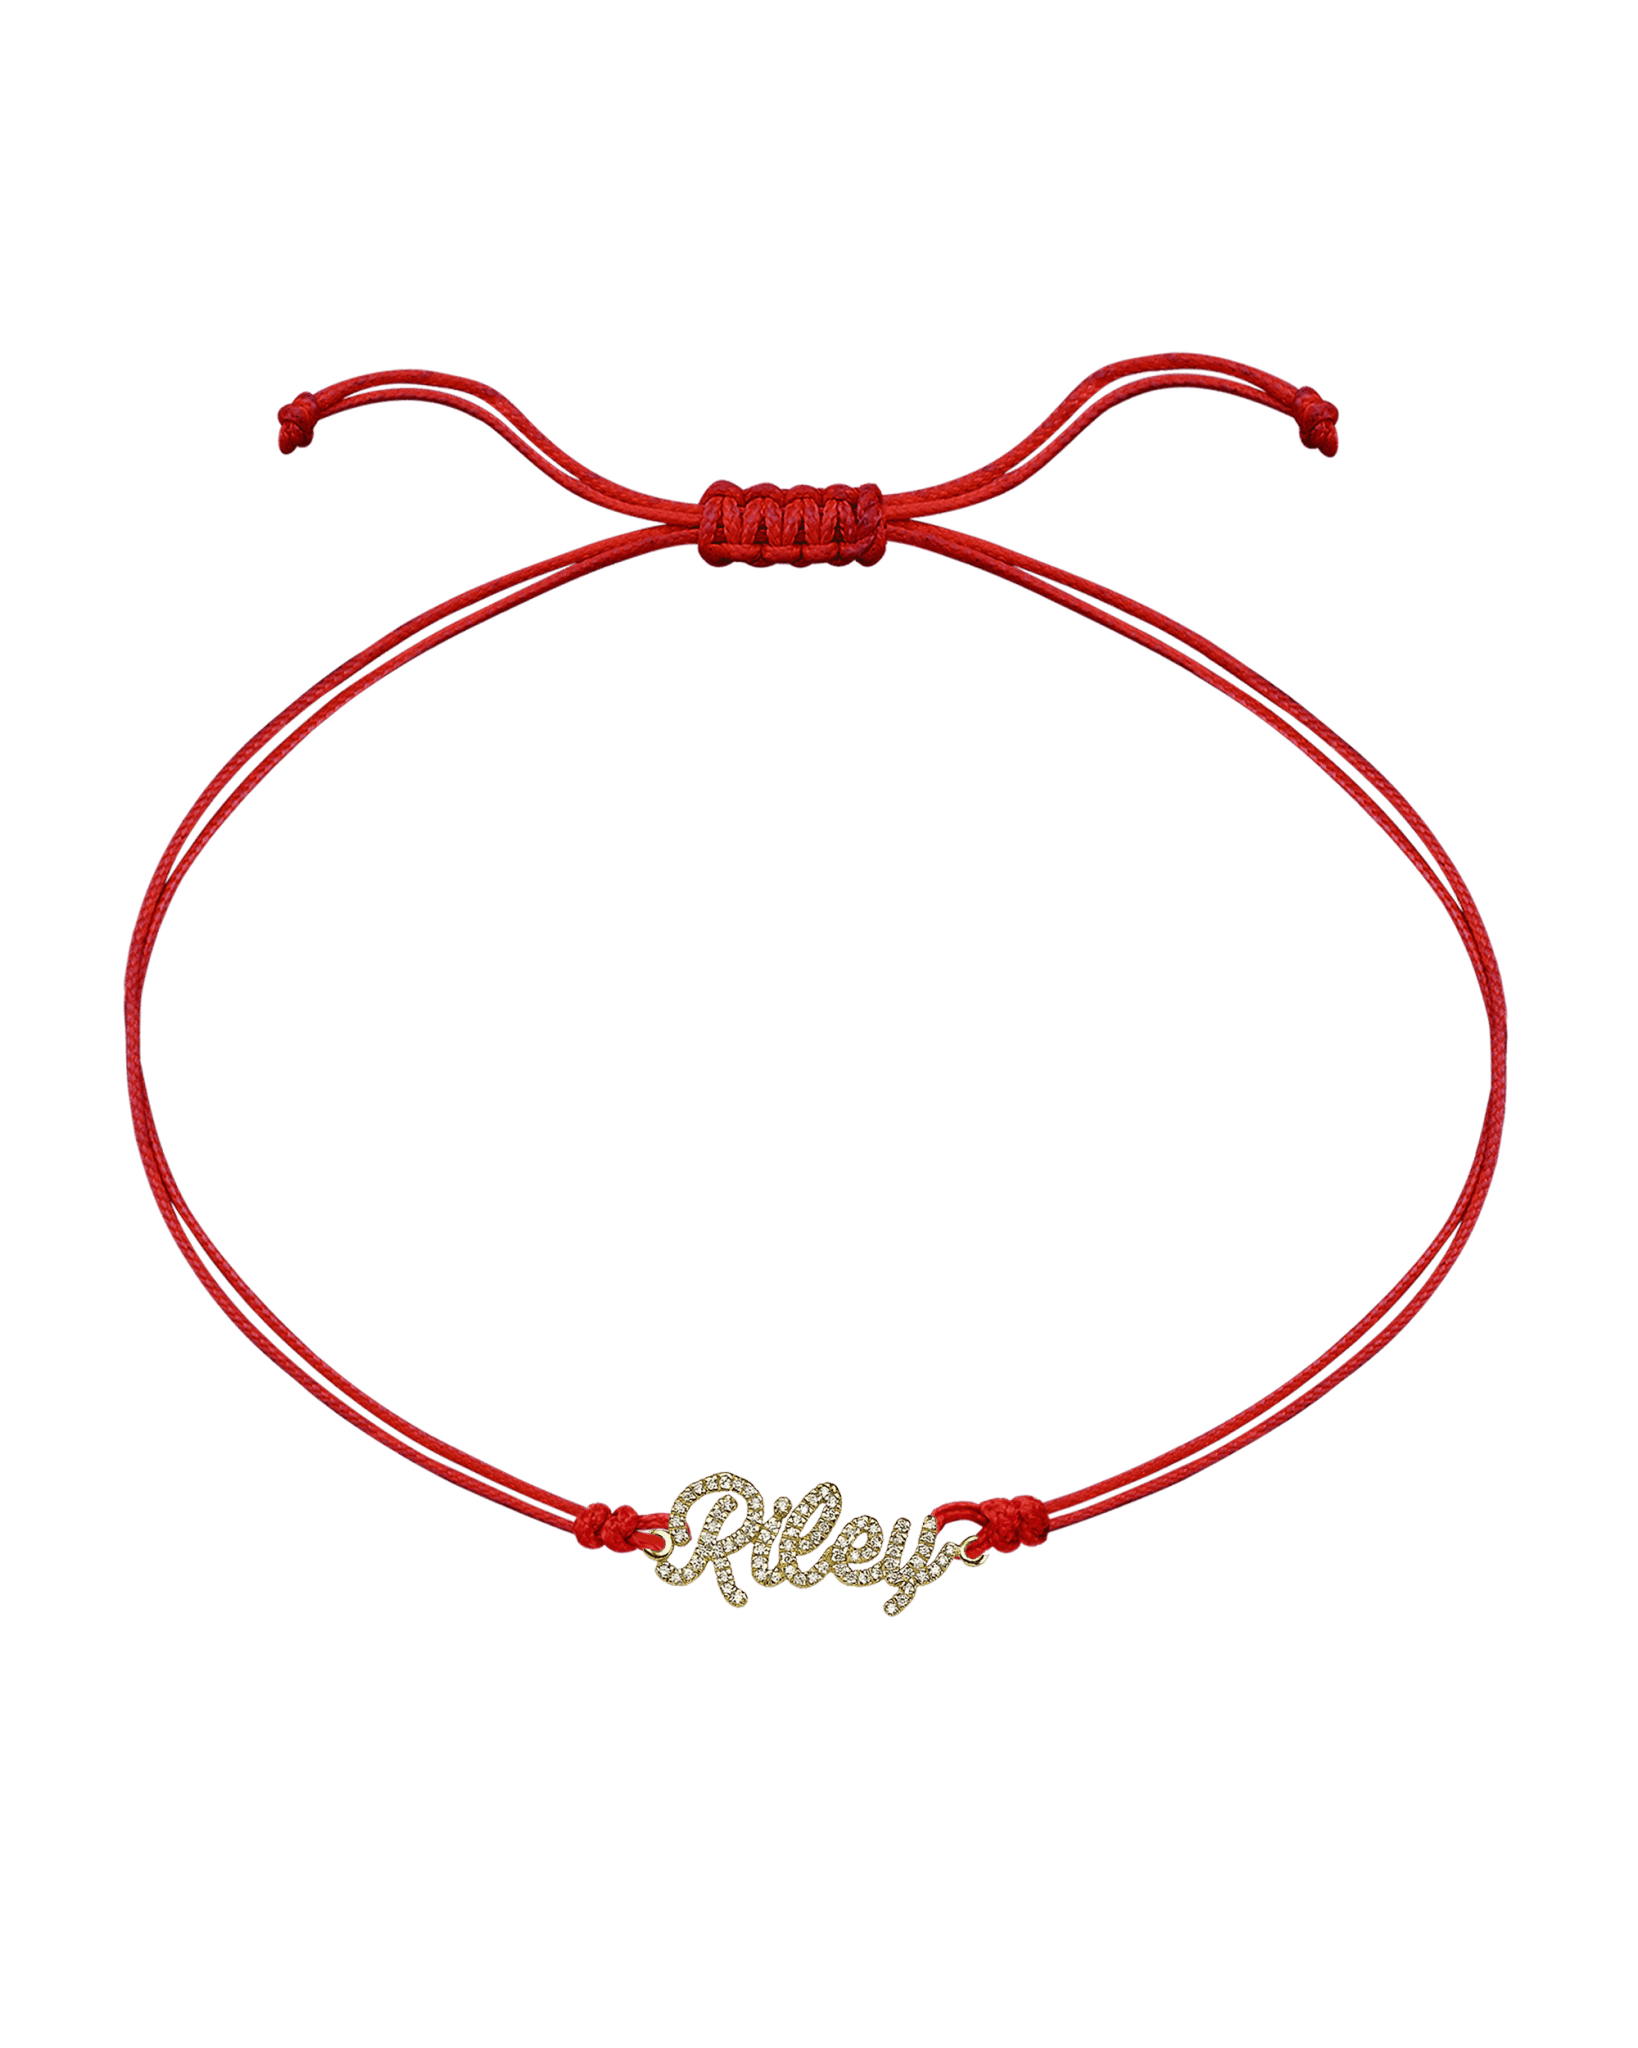 Paved Name Plate String of Love - 14K Yellow Gold Bracelet 14K Solid Gold Red 1 